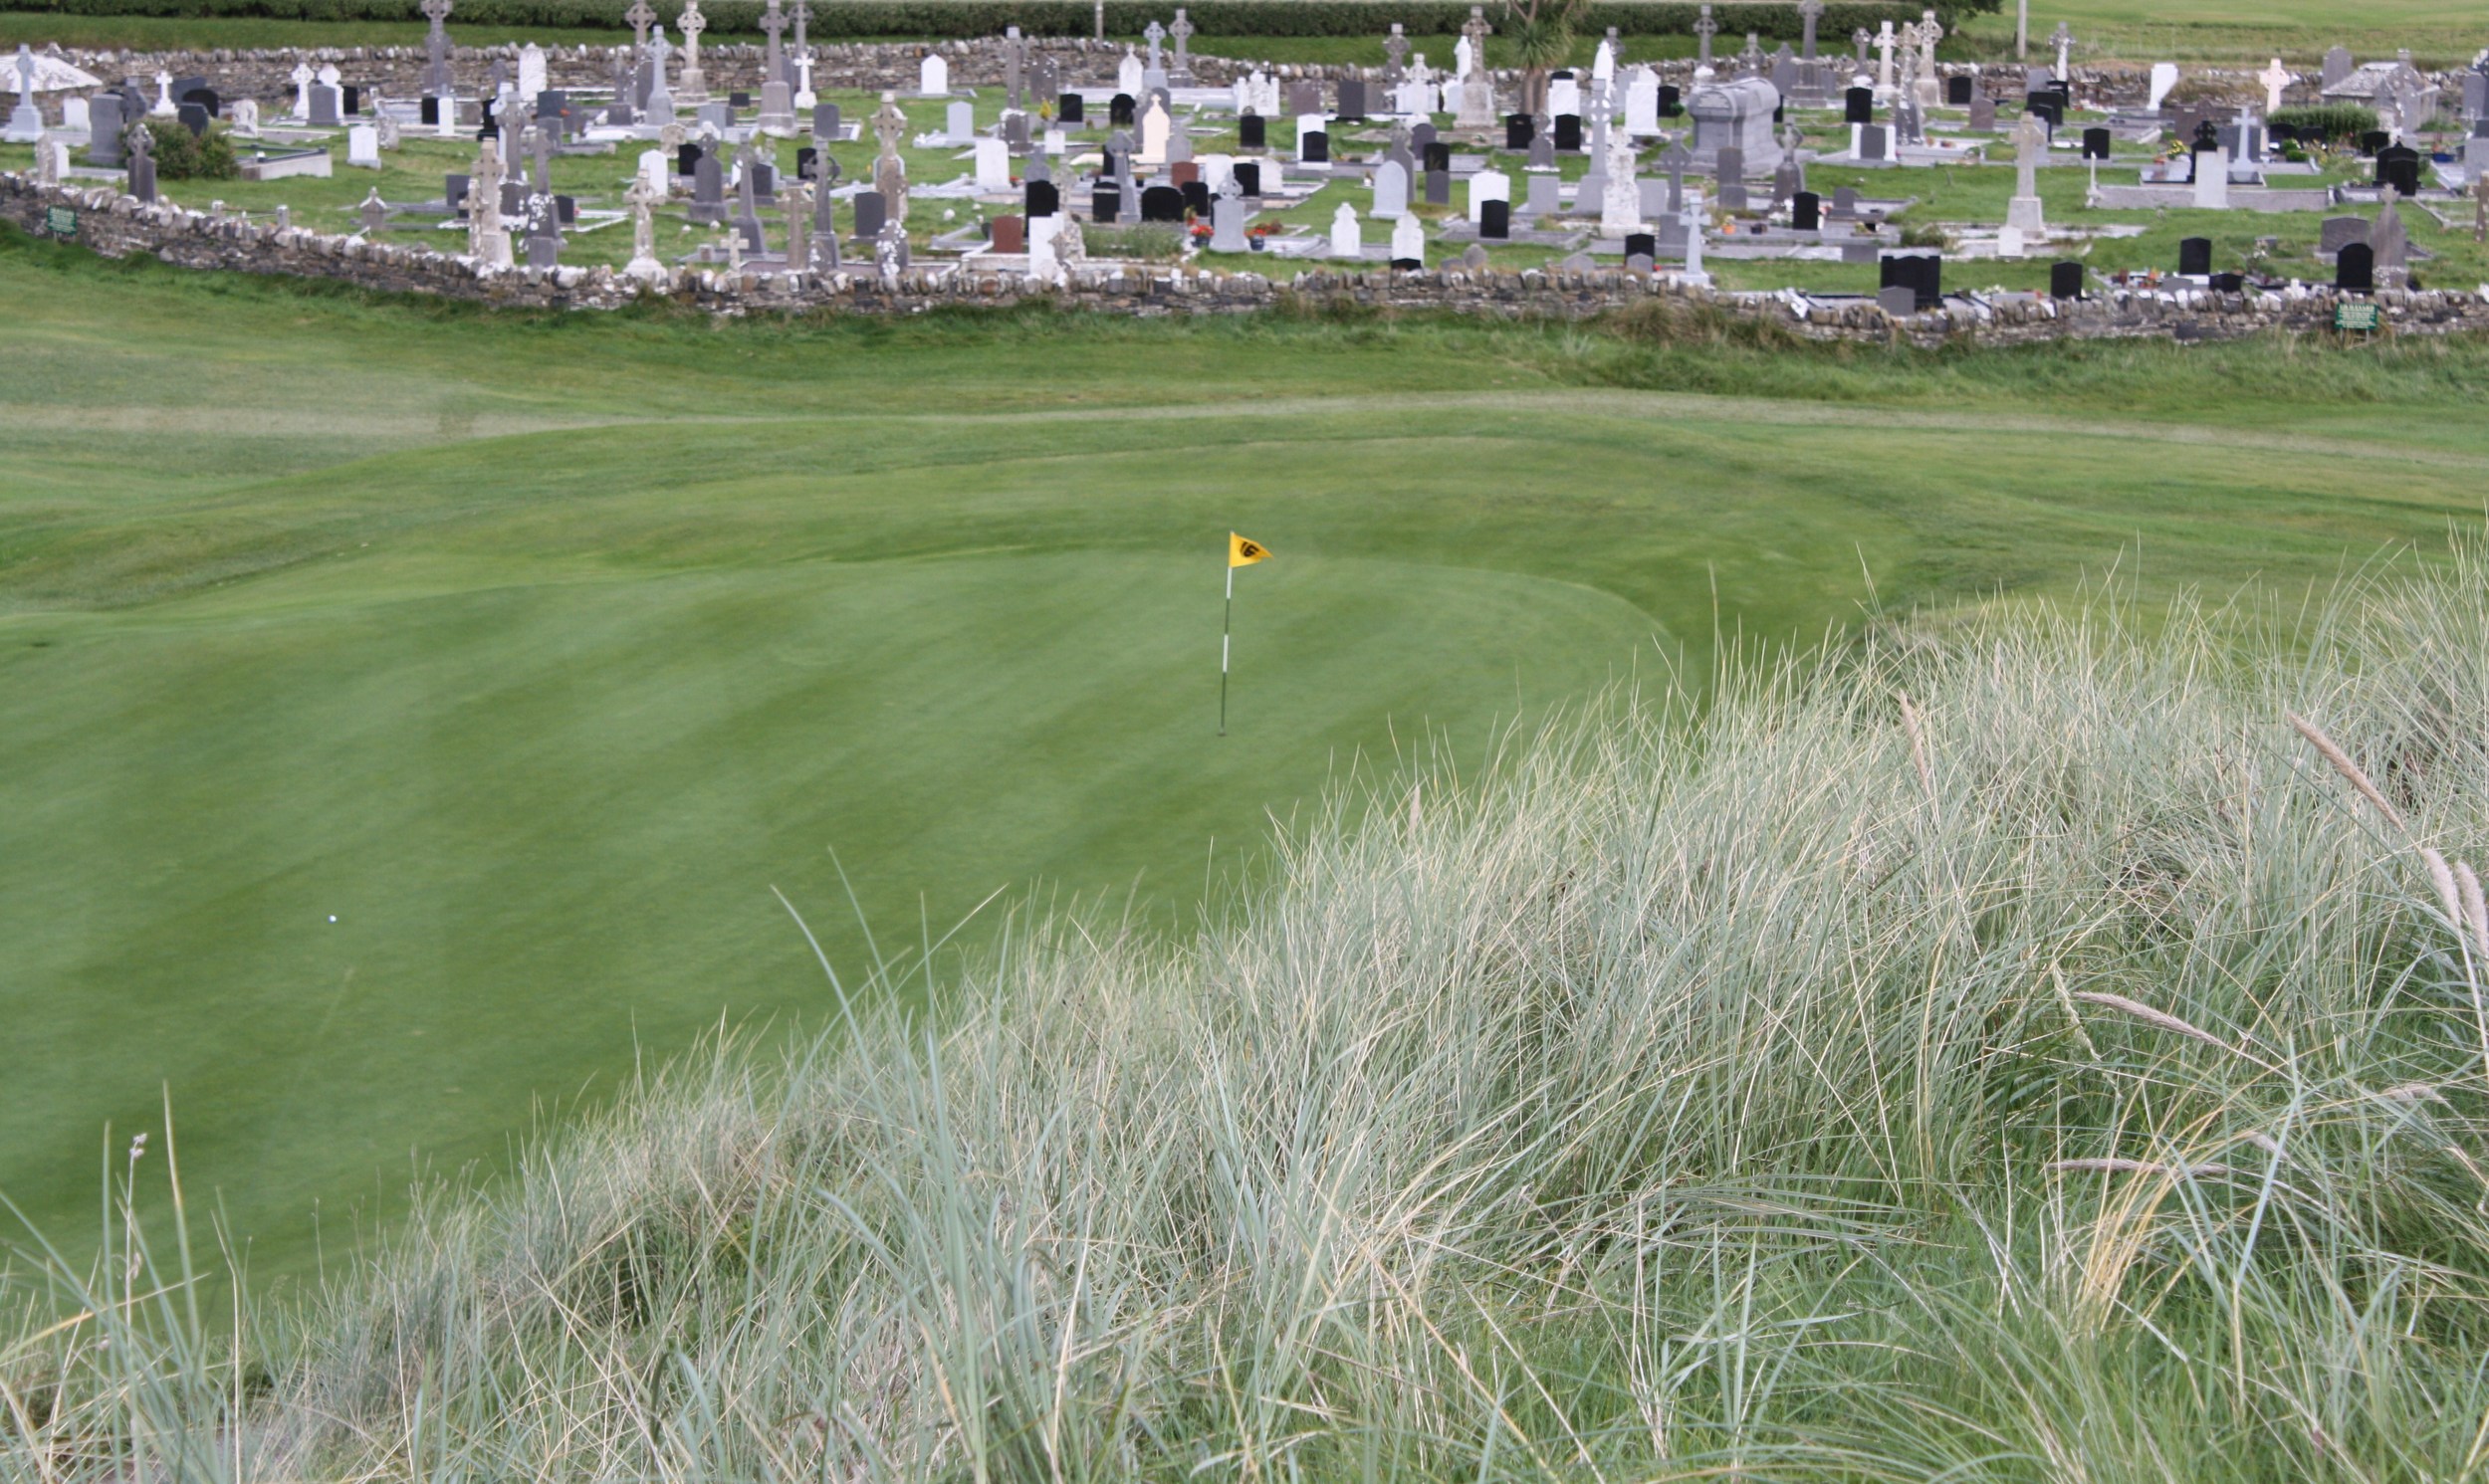 Ballybunion and the Infamous Graveyard